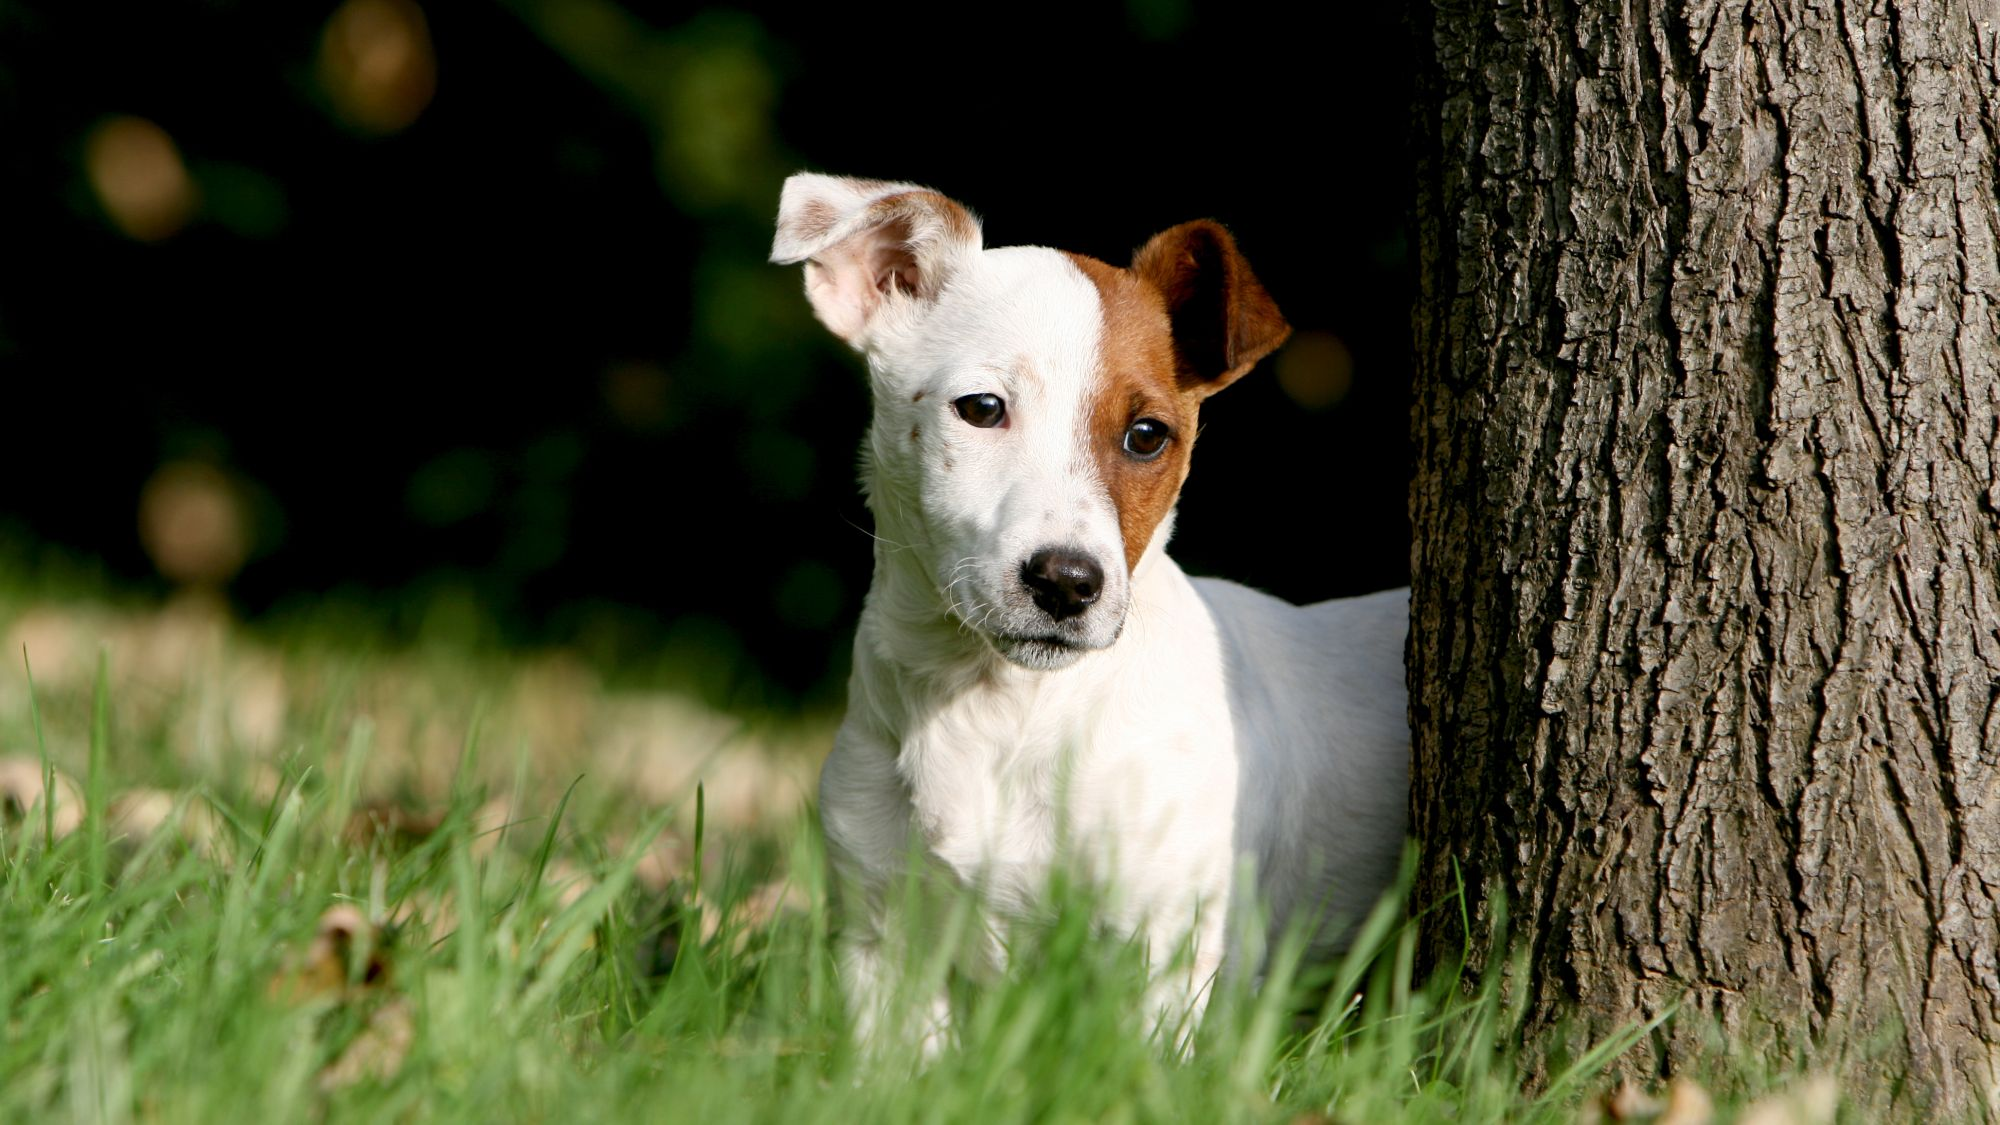 Jack Russell Terrier in color